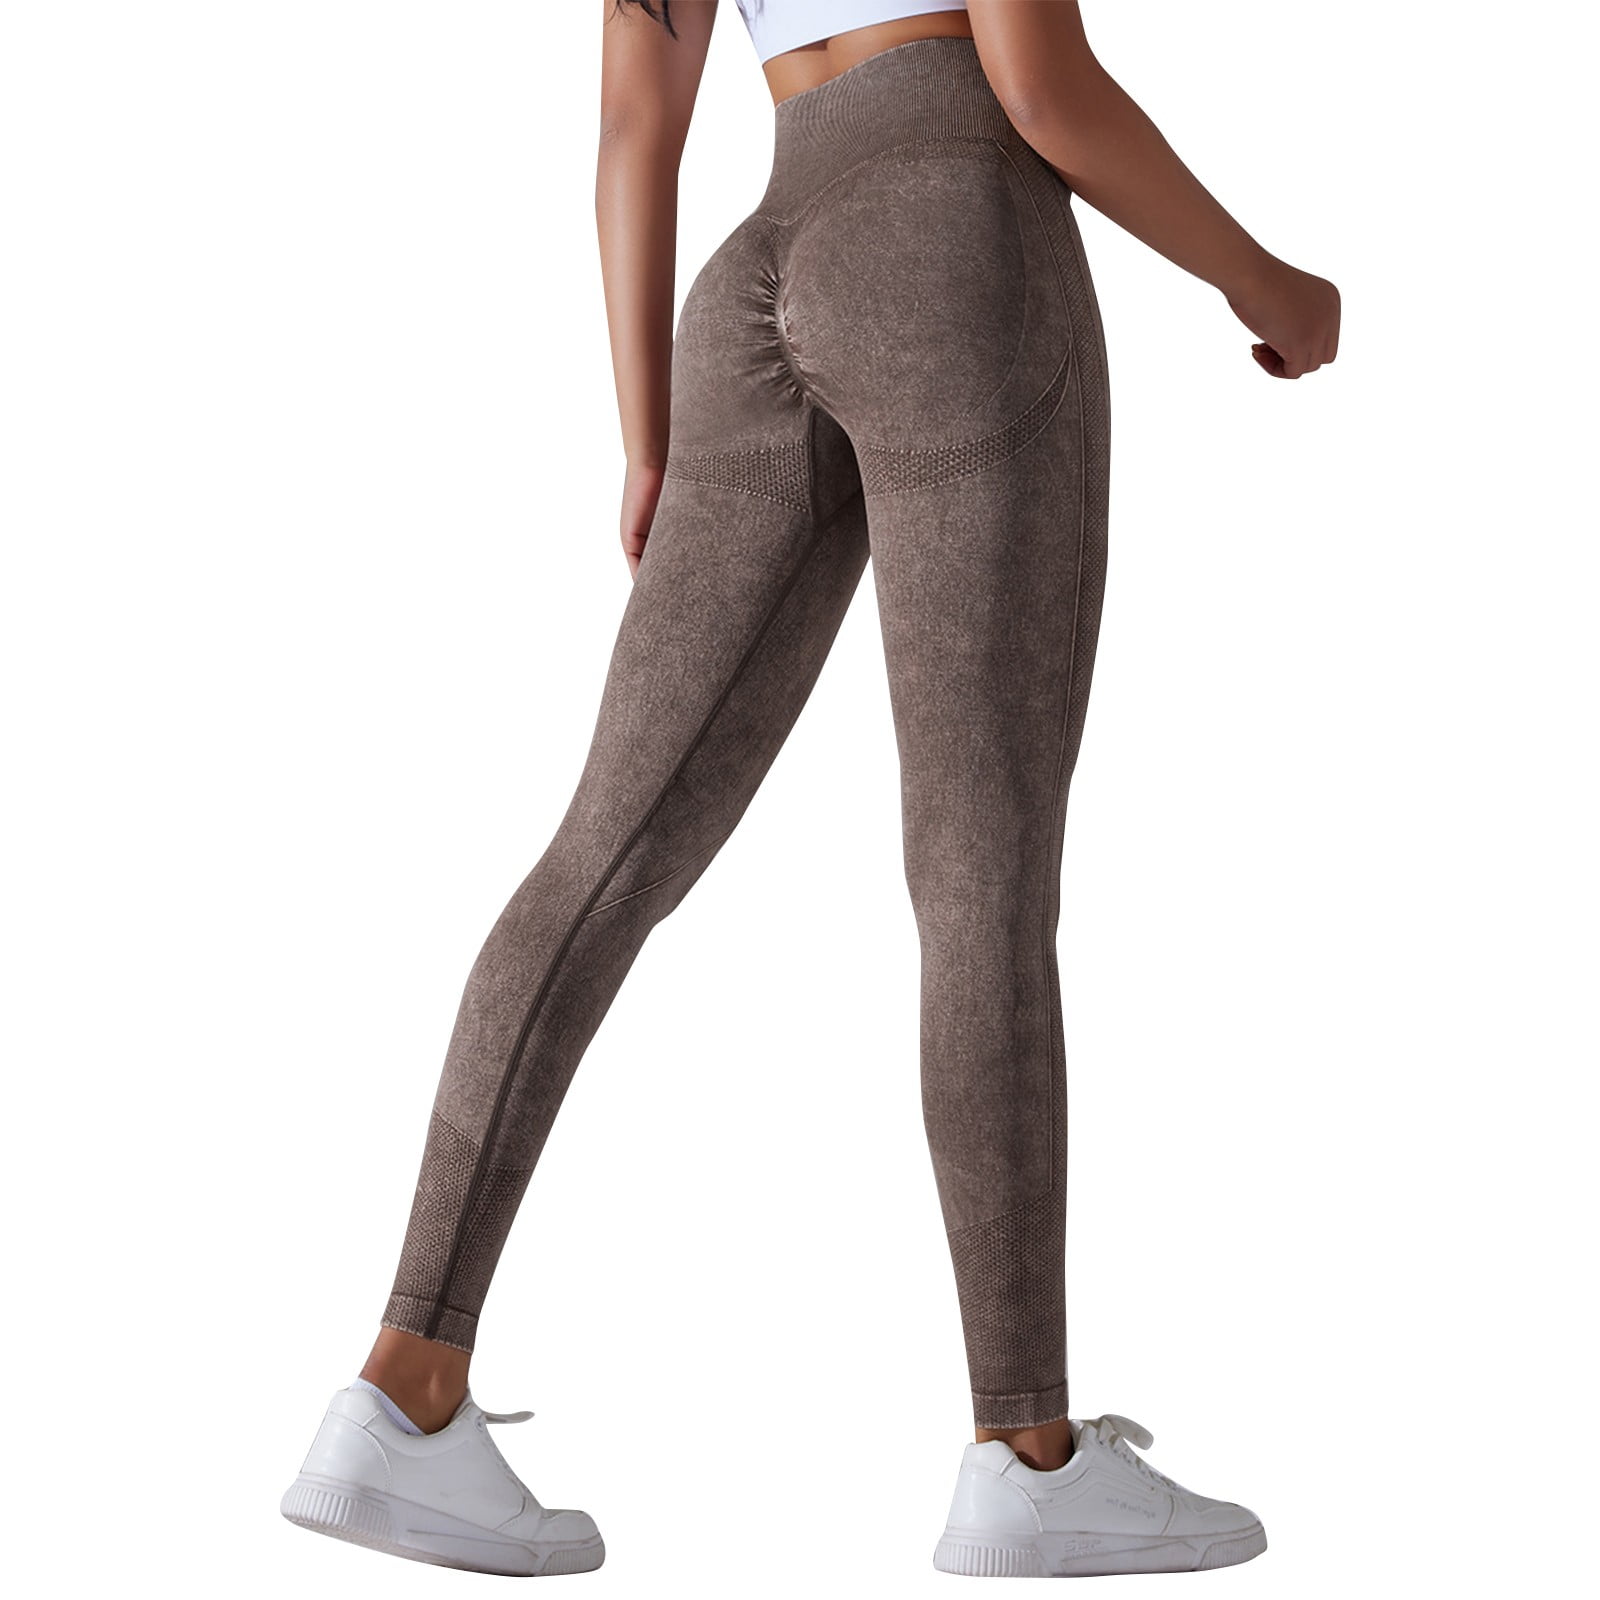 Qcmgmg Scrunch Leggings for Women Tummy Control Slim Fit Seamless Running  Yoga Pants High Waisted Fitness Sports Workout Tights Brown M